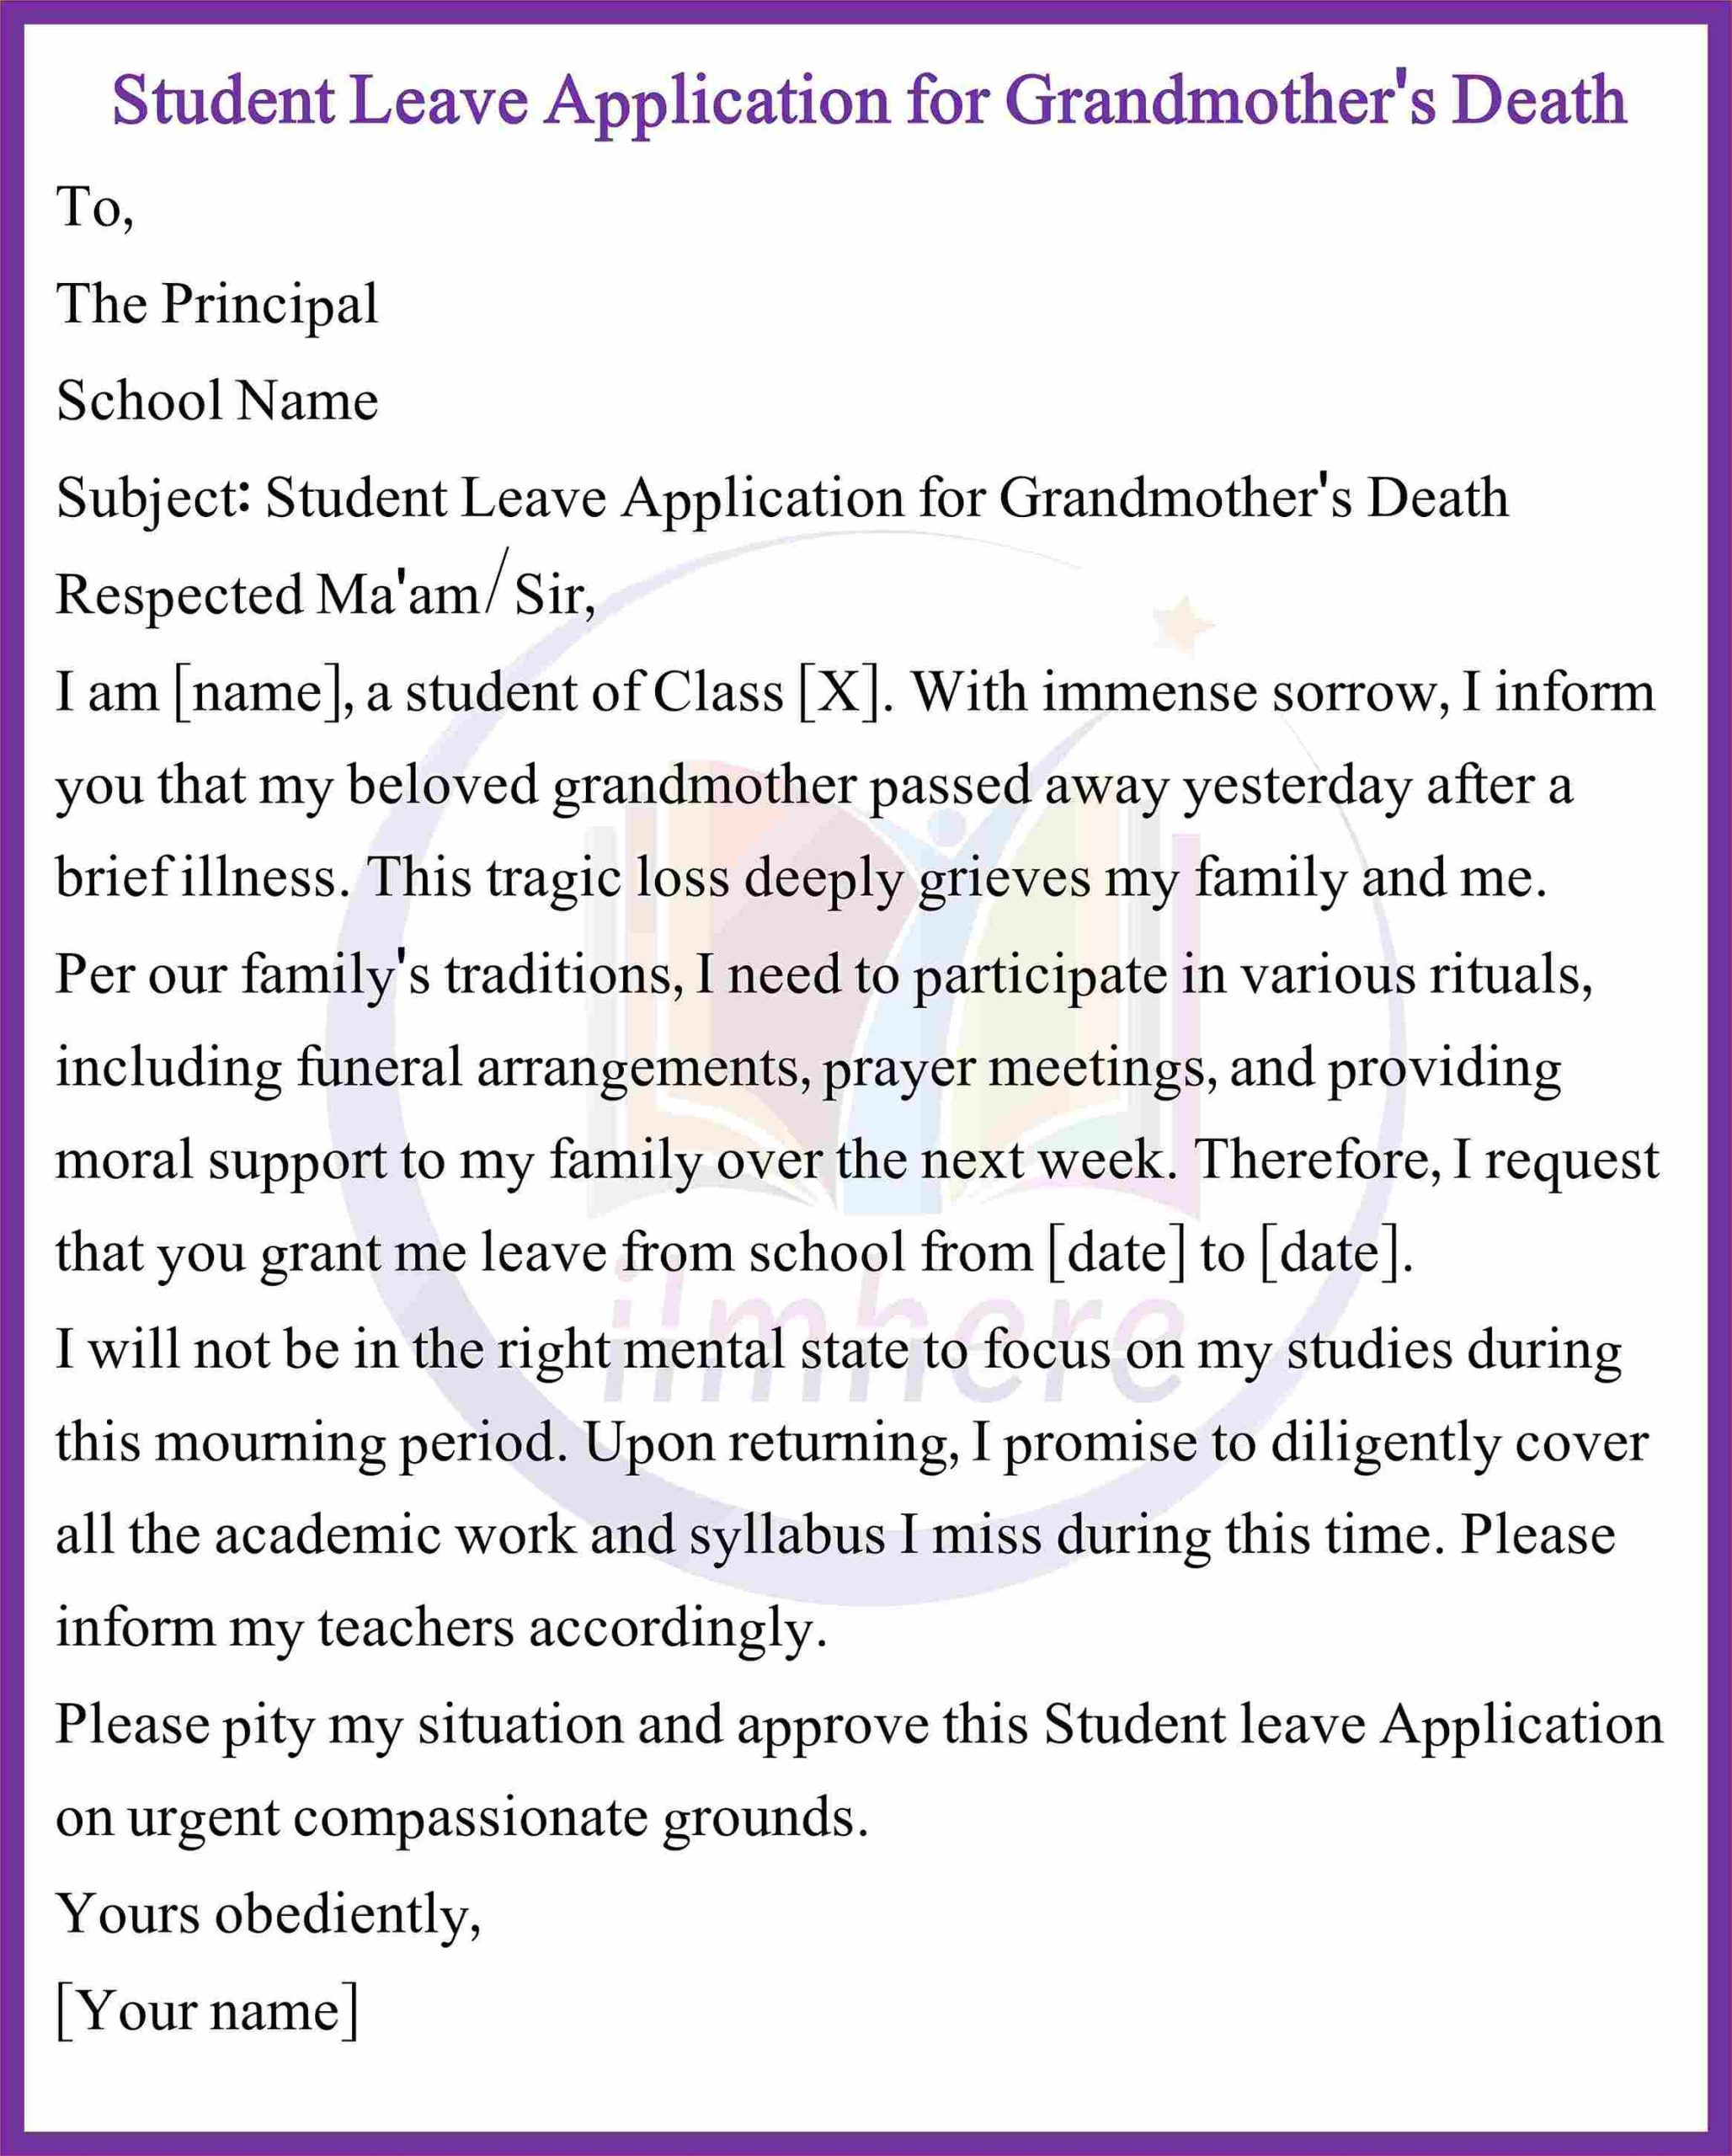 Student Leave Application for Grandmother's Death